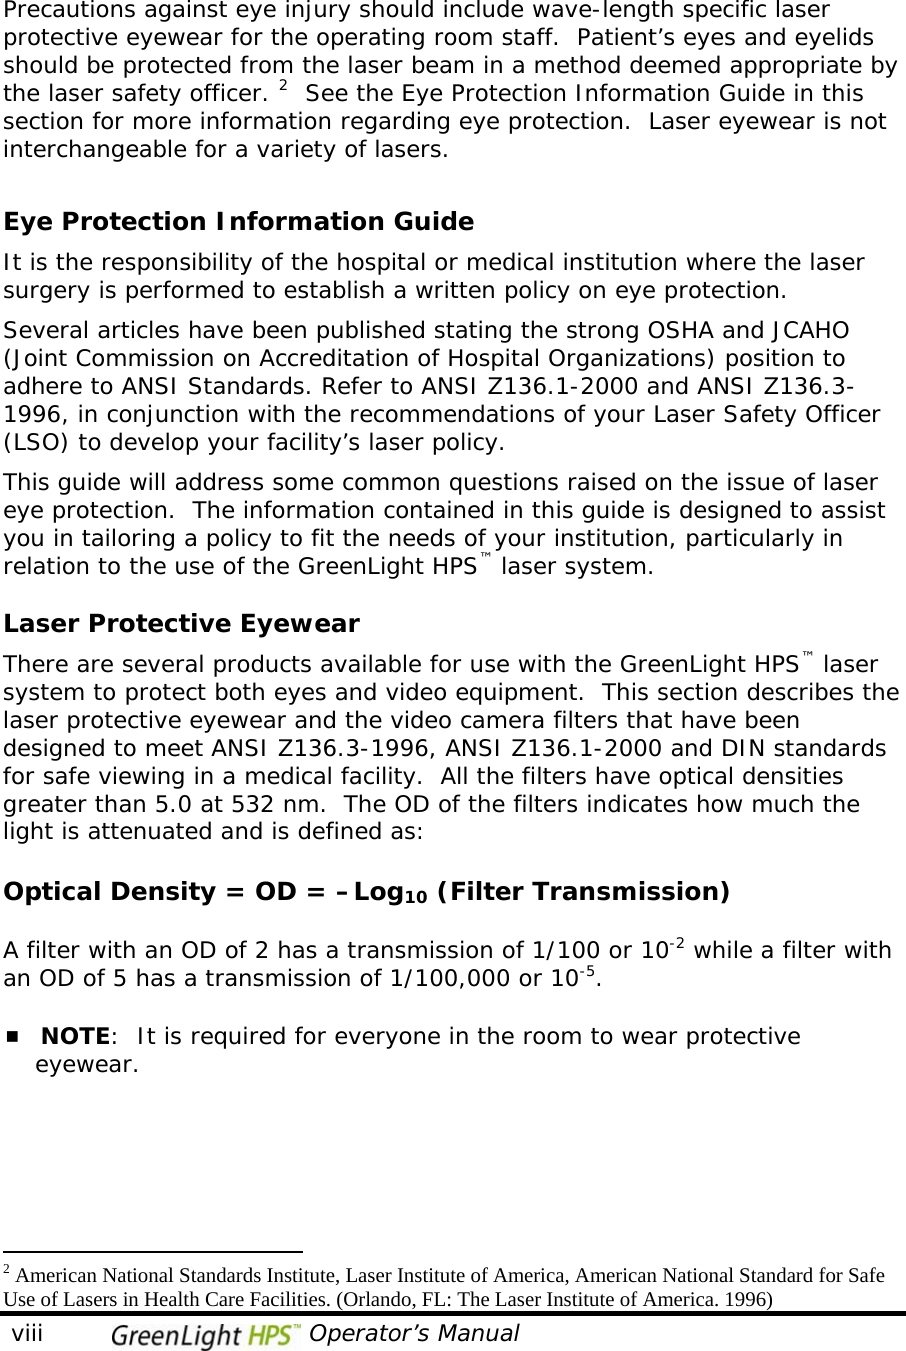   viii                                 Operator’s Manual                                               Precautions against eye injury should include wave-length specific laser protective eyewear for the operating room staff.  Patient’s eyes and eyelids should be protected from the laser beam in a method deemed appropriate by the laser safety officer. 2  See the Eye Protection Information Guide in this section for more information regarding eye protection.  Laser eyewear is not interchangeable for a variety of lasers.  Eye Protection Information Guide It is the responsibility of the hospital or medical institution where the laser surgery is performed to establish a written policy on eye protection.  Several articles have been published stating the strong OSHA and JCAHO (Joint Commission on Accreditation of Hospital Organizations) position to adhere to ANSI Standards. Refer to ANSI Z136.1-2000 and ANSI Z136.3-1996, in conjunction with the recommendations of your Laser Safety Officer (LSO) to develop your facility’s laser policy.  This guide will address some common questions raised on the issue of laser eye protection.  The information contained in this guide is designed to assist you in tailoring a policy to fit the needs of your institution, particularly in relation to the use of the GreenLight HPS™ laser system.   Laser Protective Eyewear There are several products available for use with the GreenLight HPS™ laser system to protect both eyes and video equipment.  This section describes the laser protective eyewear and the video camera filters that have been designed to meet ANSI Z136.3-1996, ANSI Z136.1-2000 and DIN standards for safe viewing in a medical facility.  All the filters have optical densities greater than 5.0 at 532 nm.  The OD of the filters indicates how much the light is attenuated and is defined as:  Optical Density = OD = –Log10 (Filter Transmission)  A filter with an OD of 2 has a transmission of 1/100 or 10-2 while a filter with an OD of 5 has a transmission of 1/100,000 or 10-5.   NOTE:  It is required for everyone in the room to wear protective      eyewear.                                                    2 American National Standards Institute, Laser Institute of America, American National Standard for Safe Use of Lasers in Health Care Facilities. (Orlando, FL: The Laser Institute of America. 1996)                     